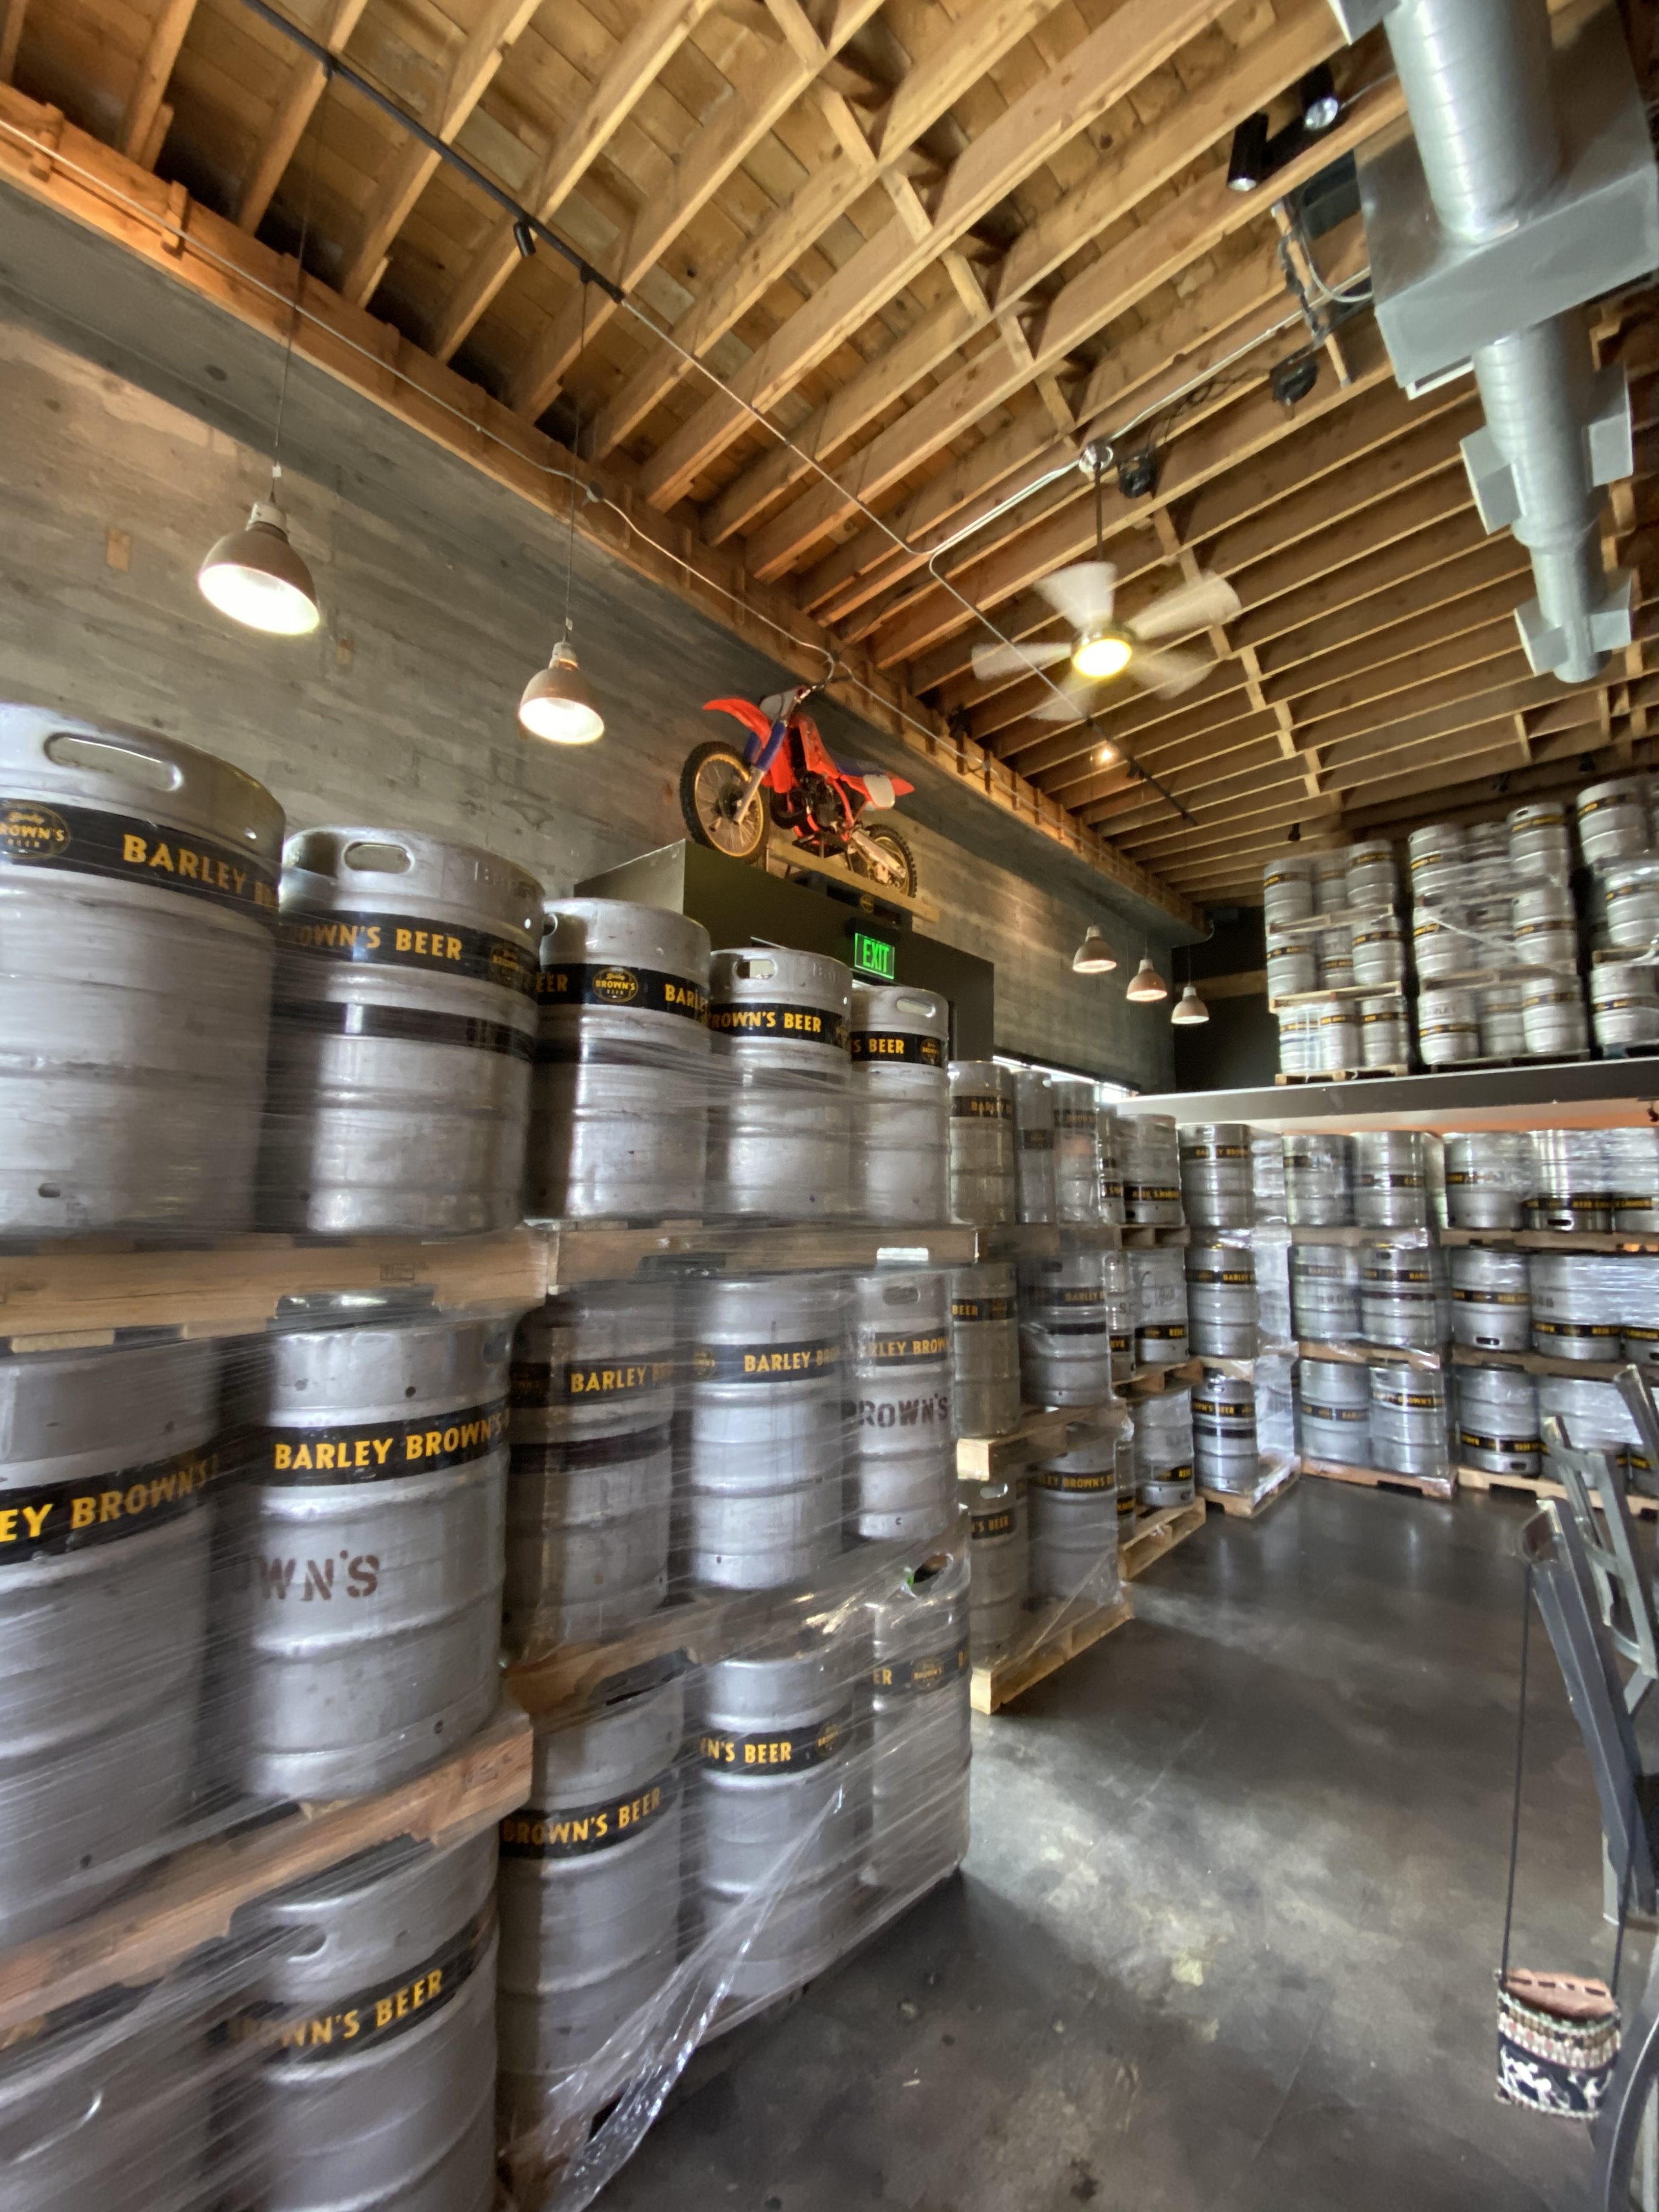 Kegs are stacking up and taking up prime taproom real estate at Barley Brown's Beer in Baker City. (image courtesy of Tyler Brown)